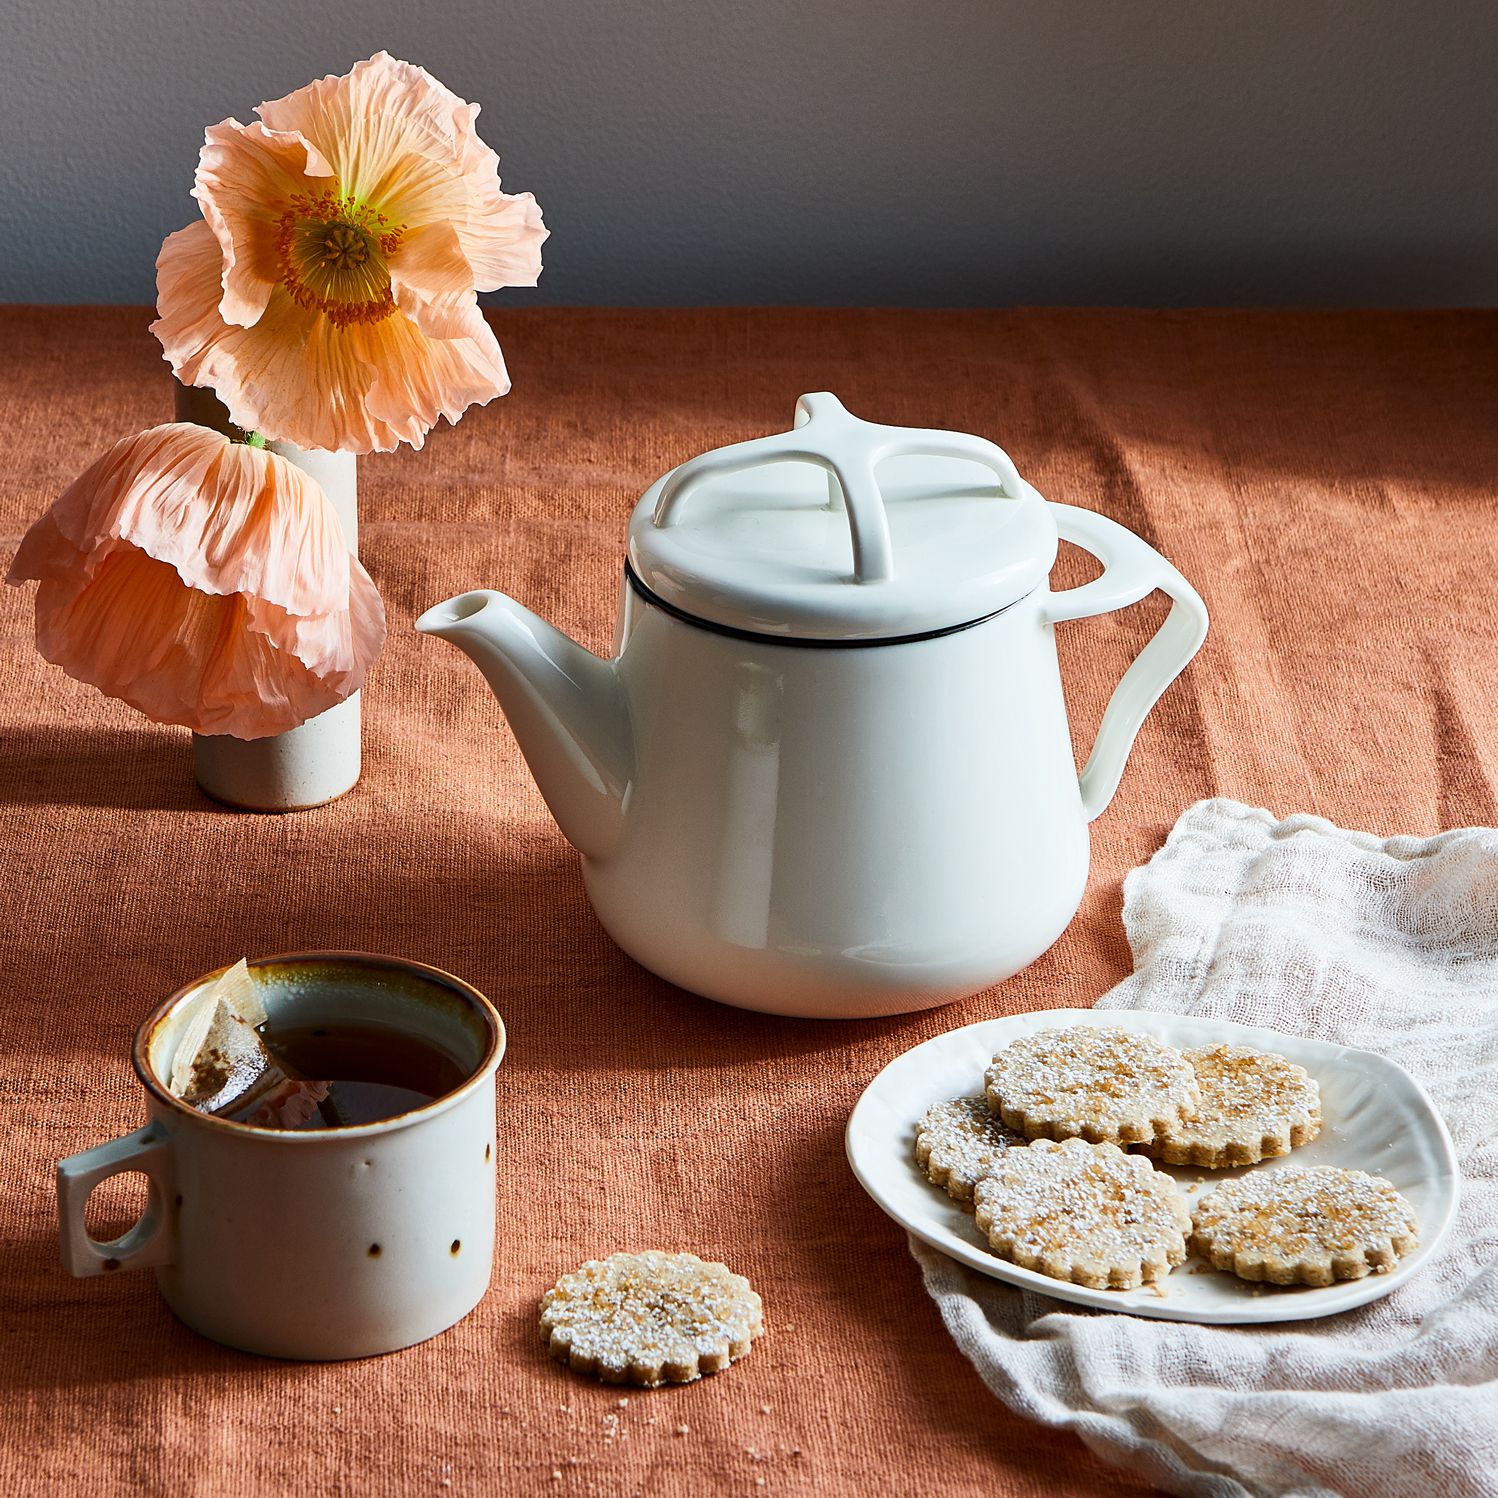 The 25 Coziest Gifts for Your Favorite Tea Lover